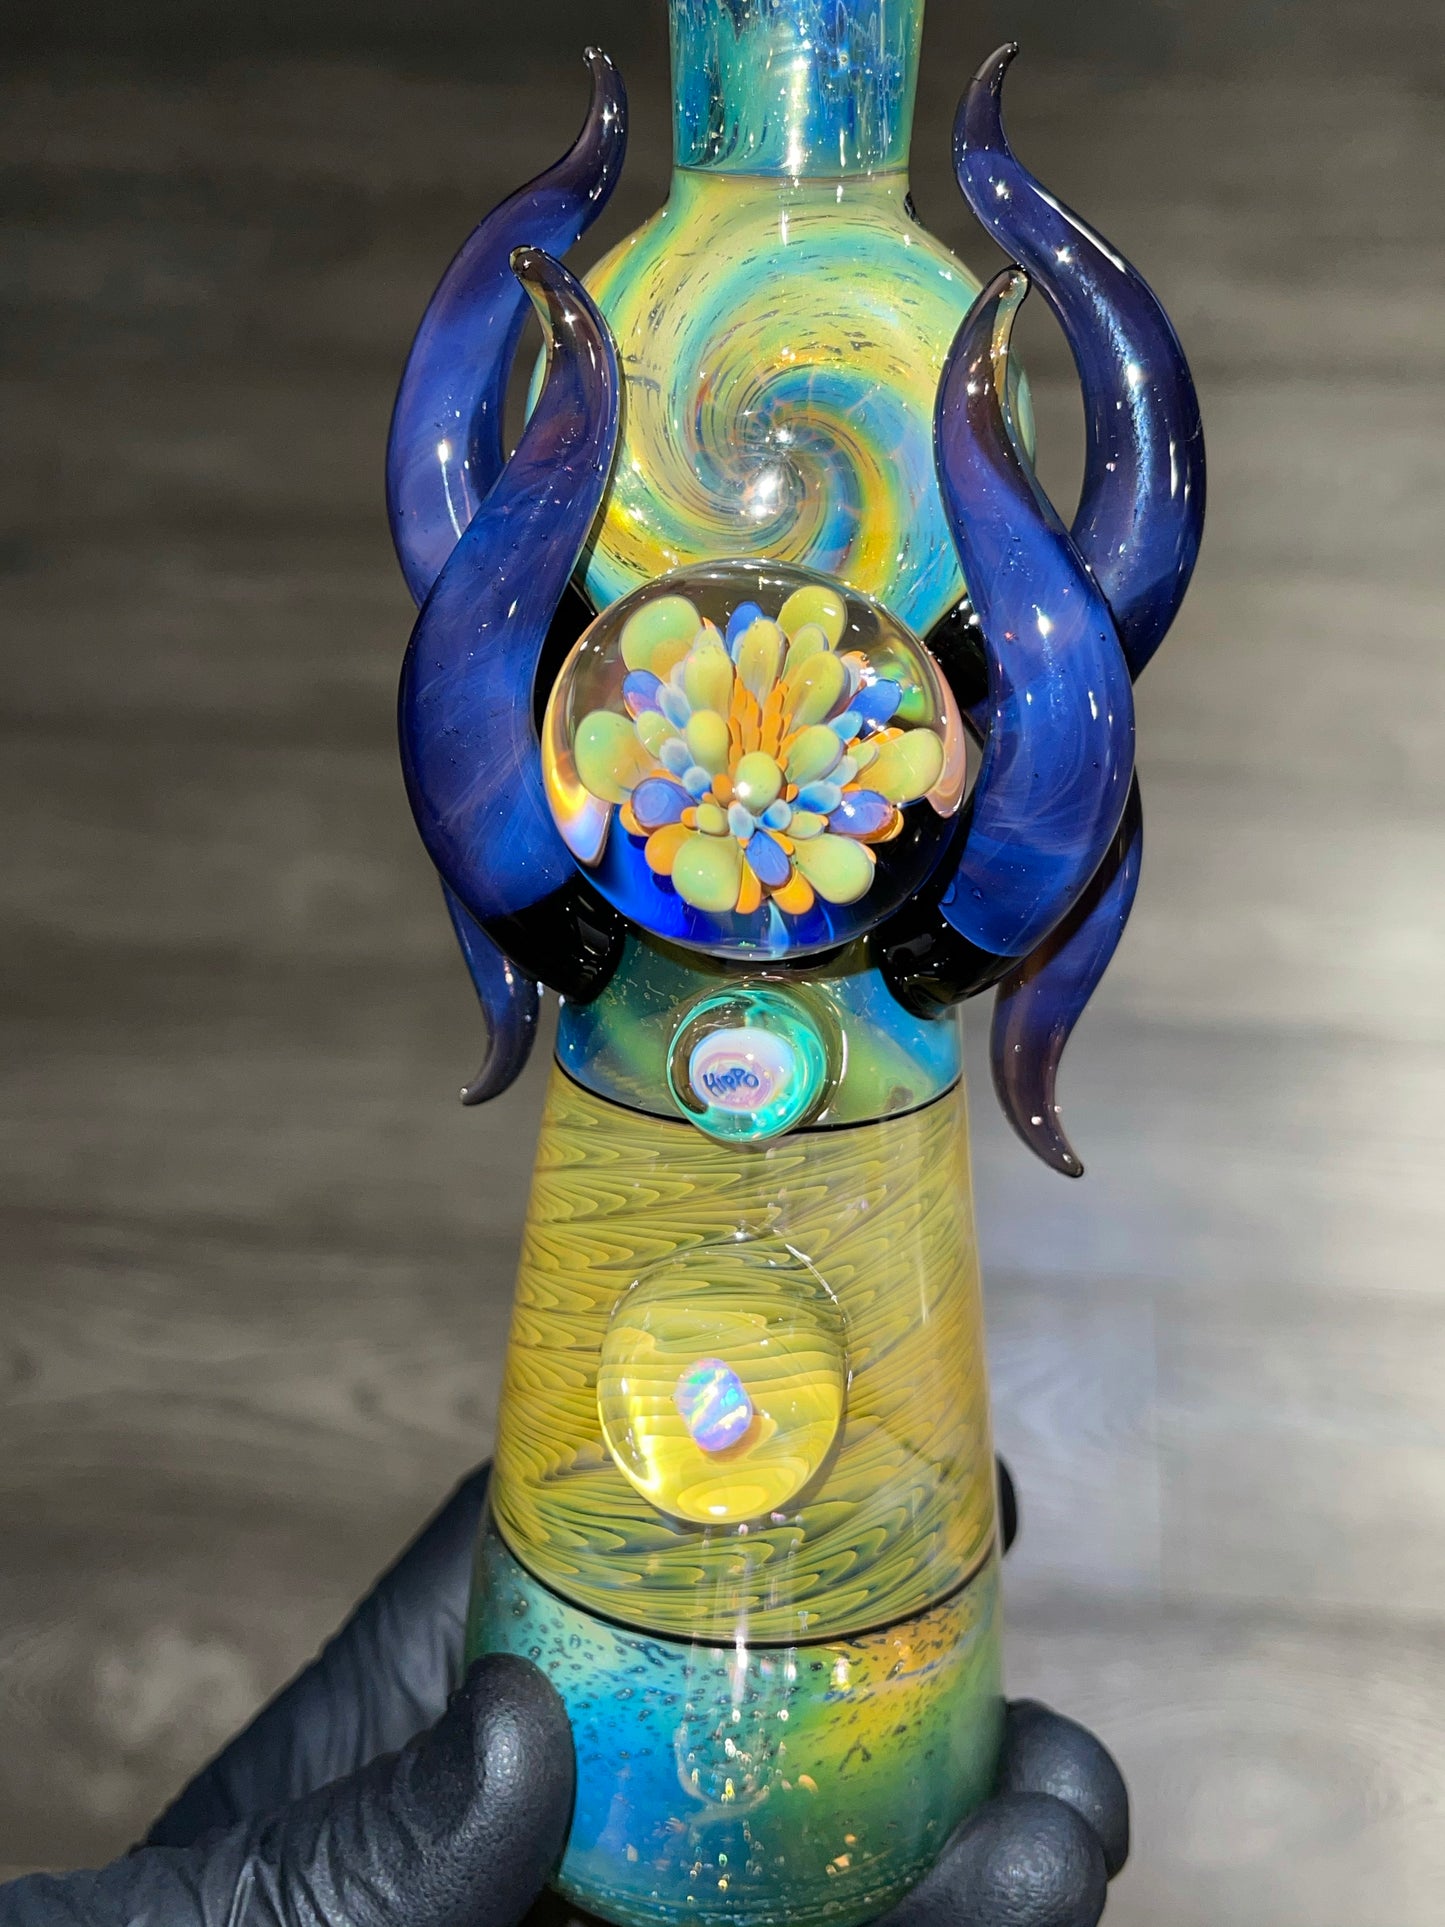 Fumed Disk Flask w/ Royal Jelly Horns